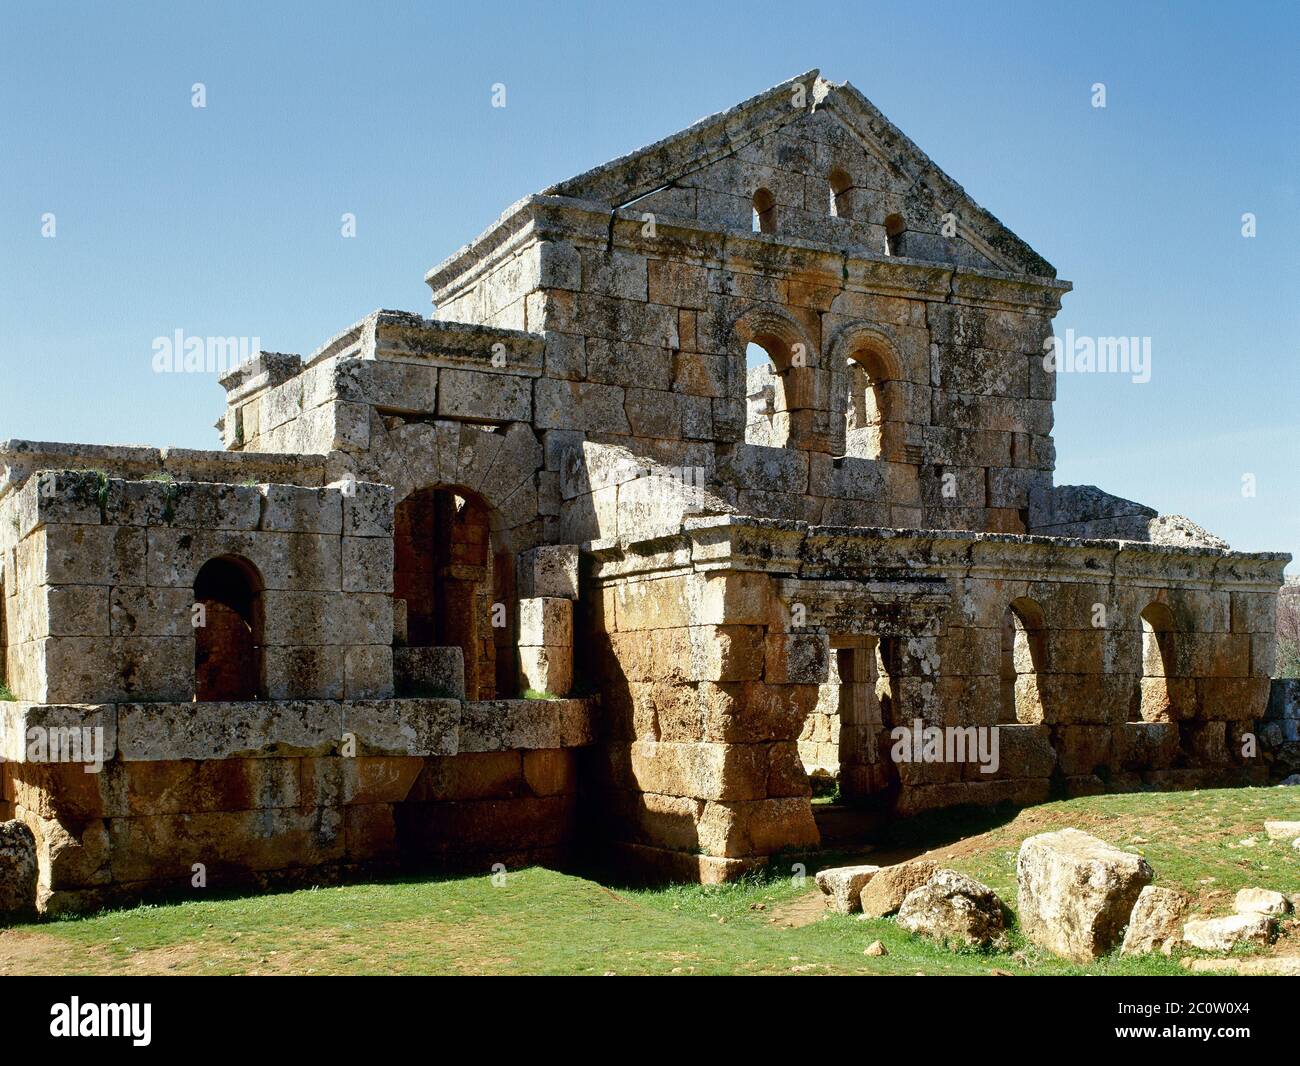 Syria. Dead Cities. Serjilla. Ancient city founded ca. 473 AD and abandoned in 7th century AD. Public baths (Byzantine period). Exterior view. East facade. (Photo taken before the Syrian  civil war). Stock Photo